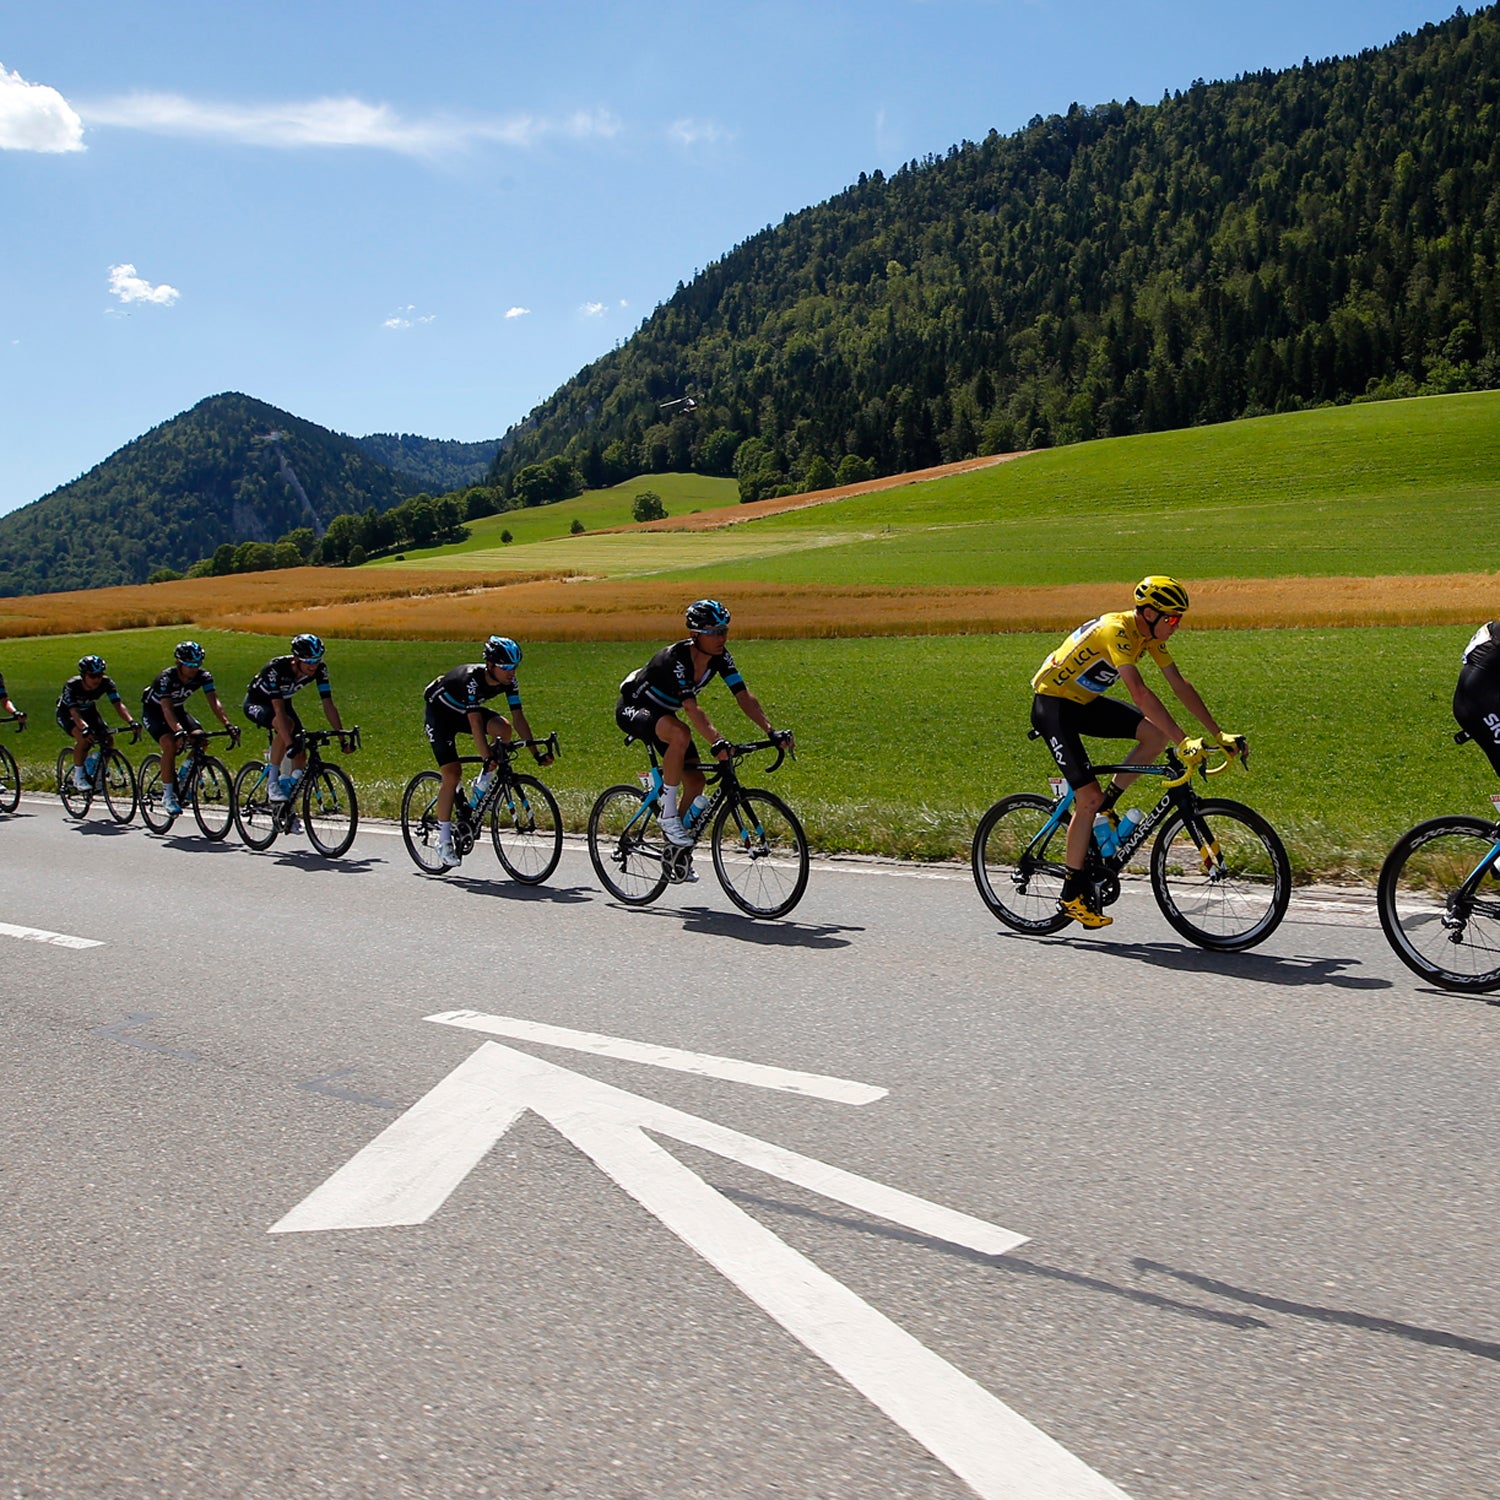 On average, each Tour de France racer will consume as much as 8,000 calories per day, simply to keep up with the pack.